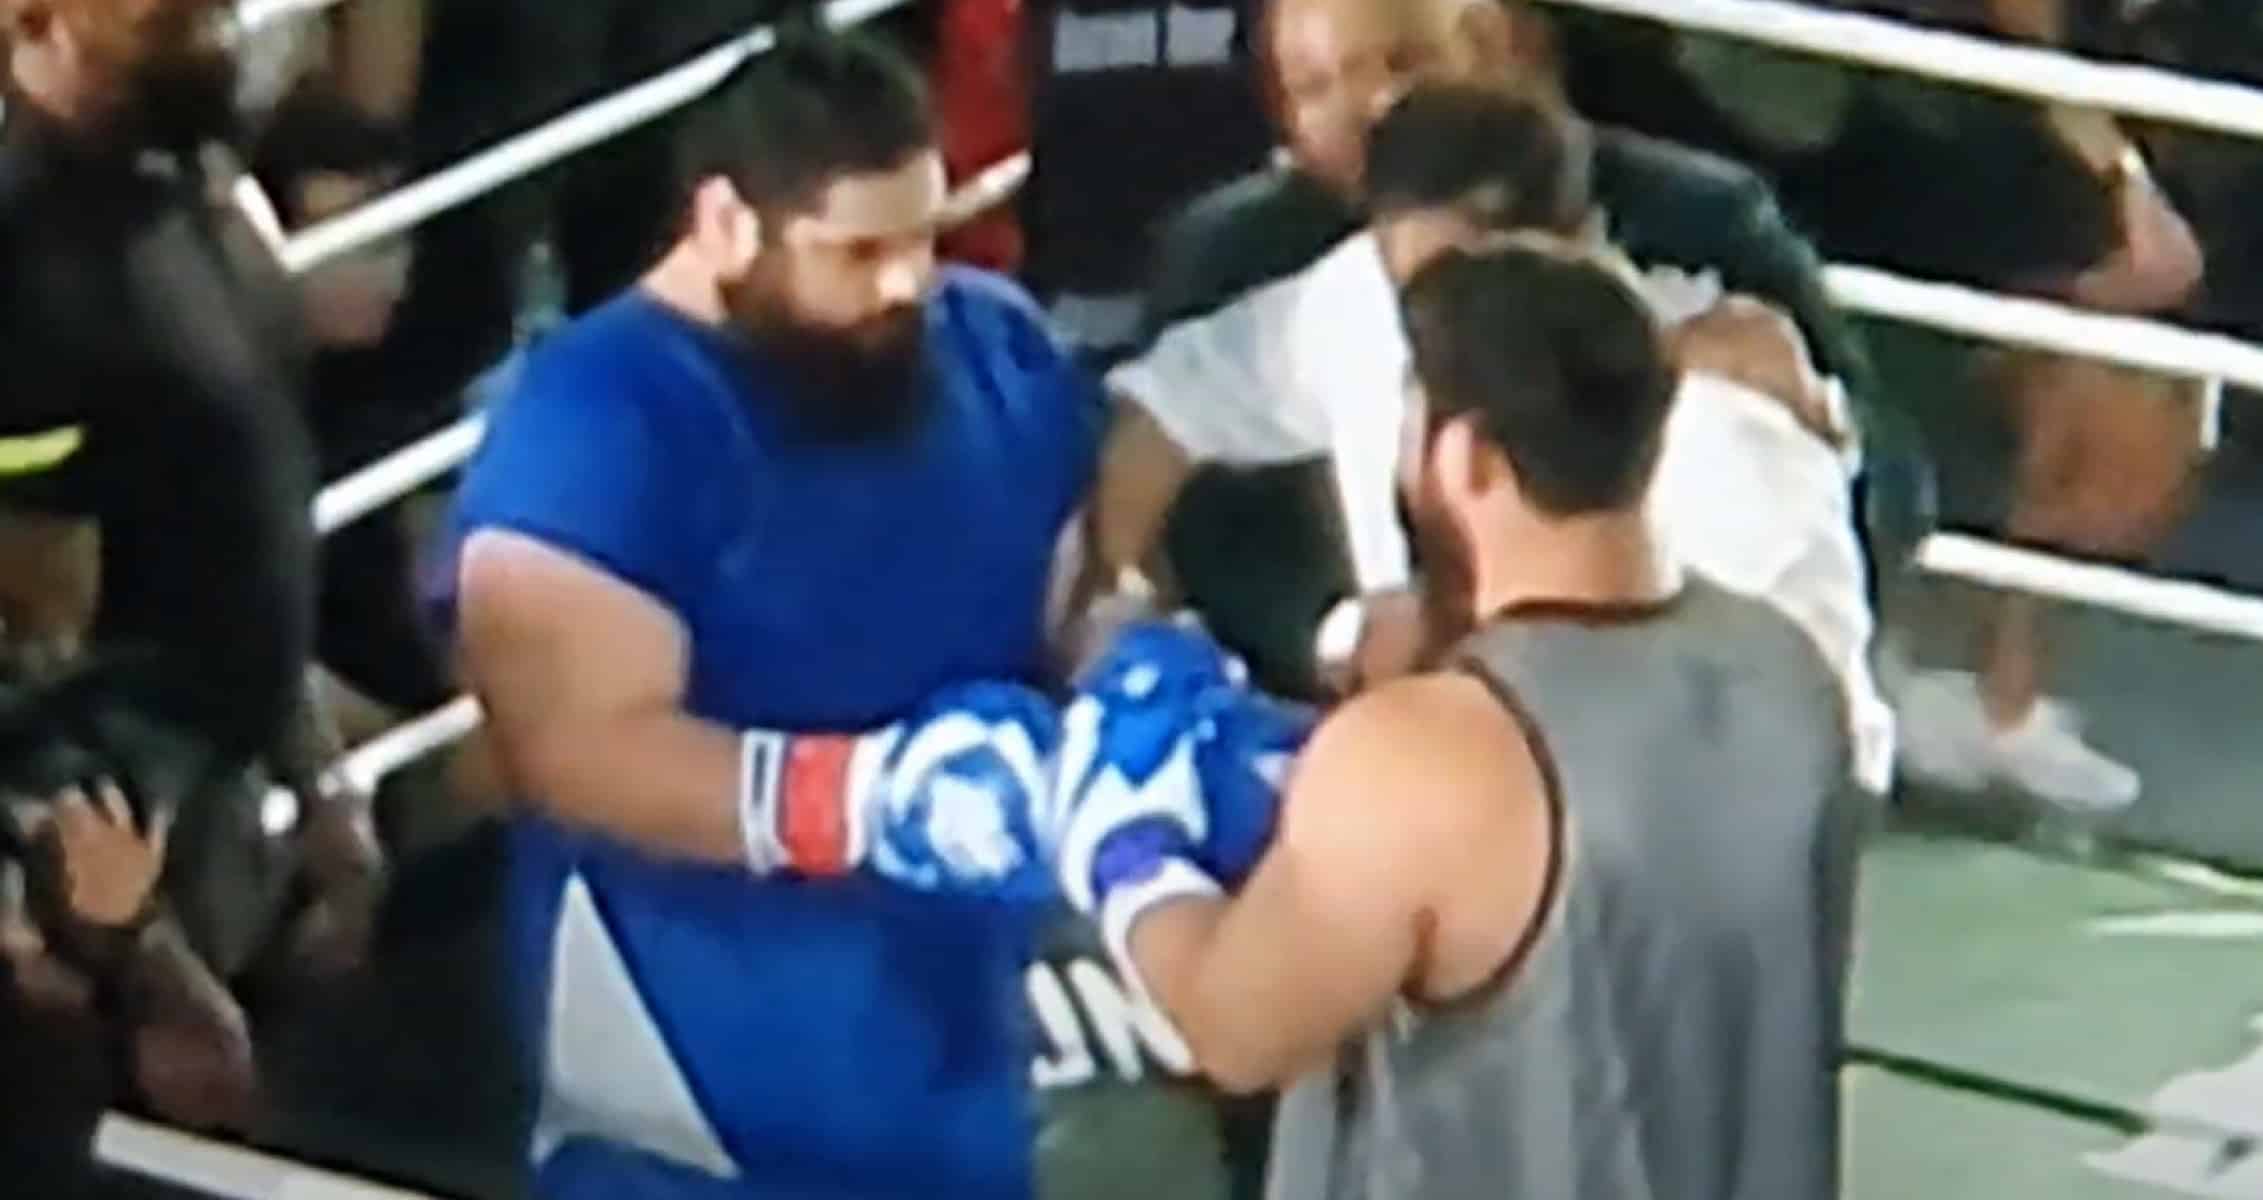 Opinion: We Should Stop Supporting Fights Like The Iranian Hulk vs The Kazakh Titan